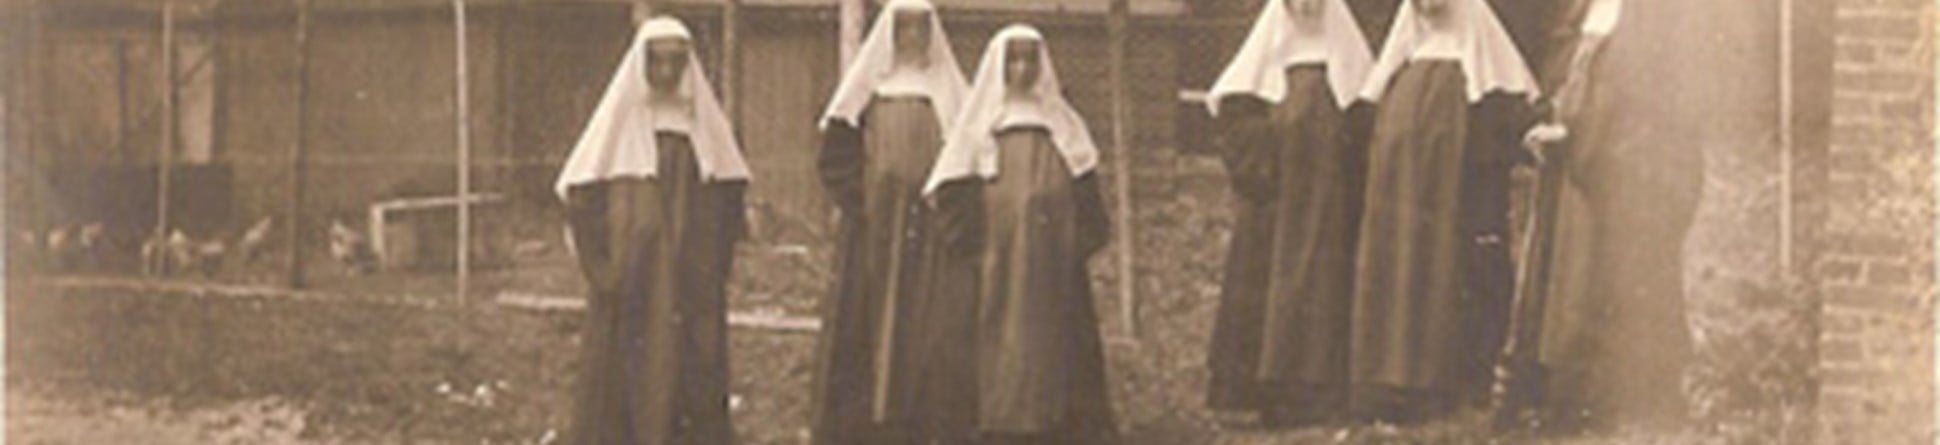 Sisters in the grounds of St Marye's Convent, Portslade, 1905, archive ref. IIF/37/2/3/1
Reproduced by permission of the Generalate of the Poor Servants of the Mother of God